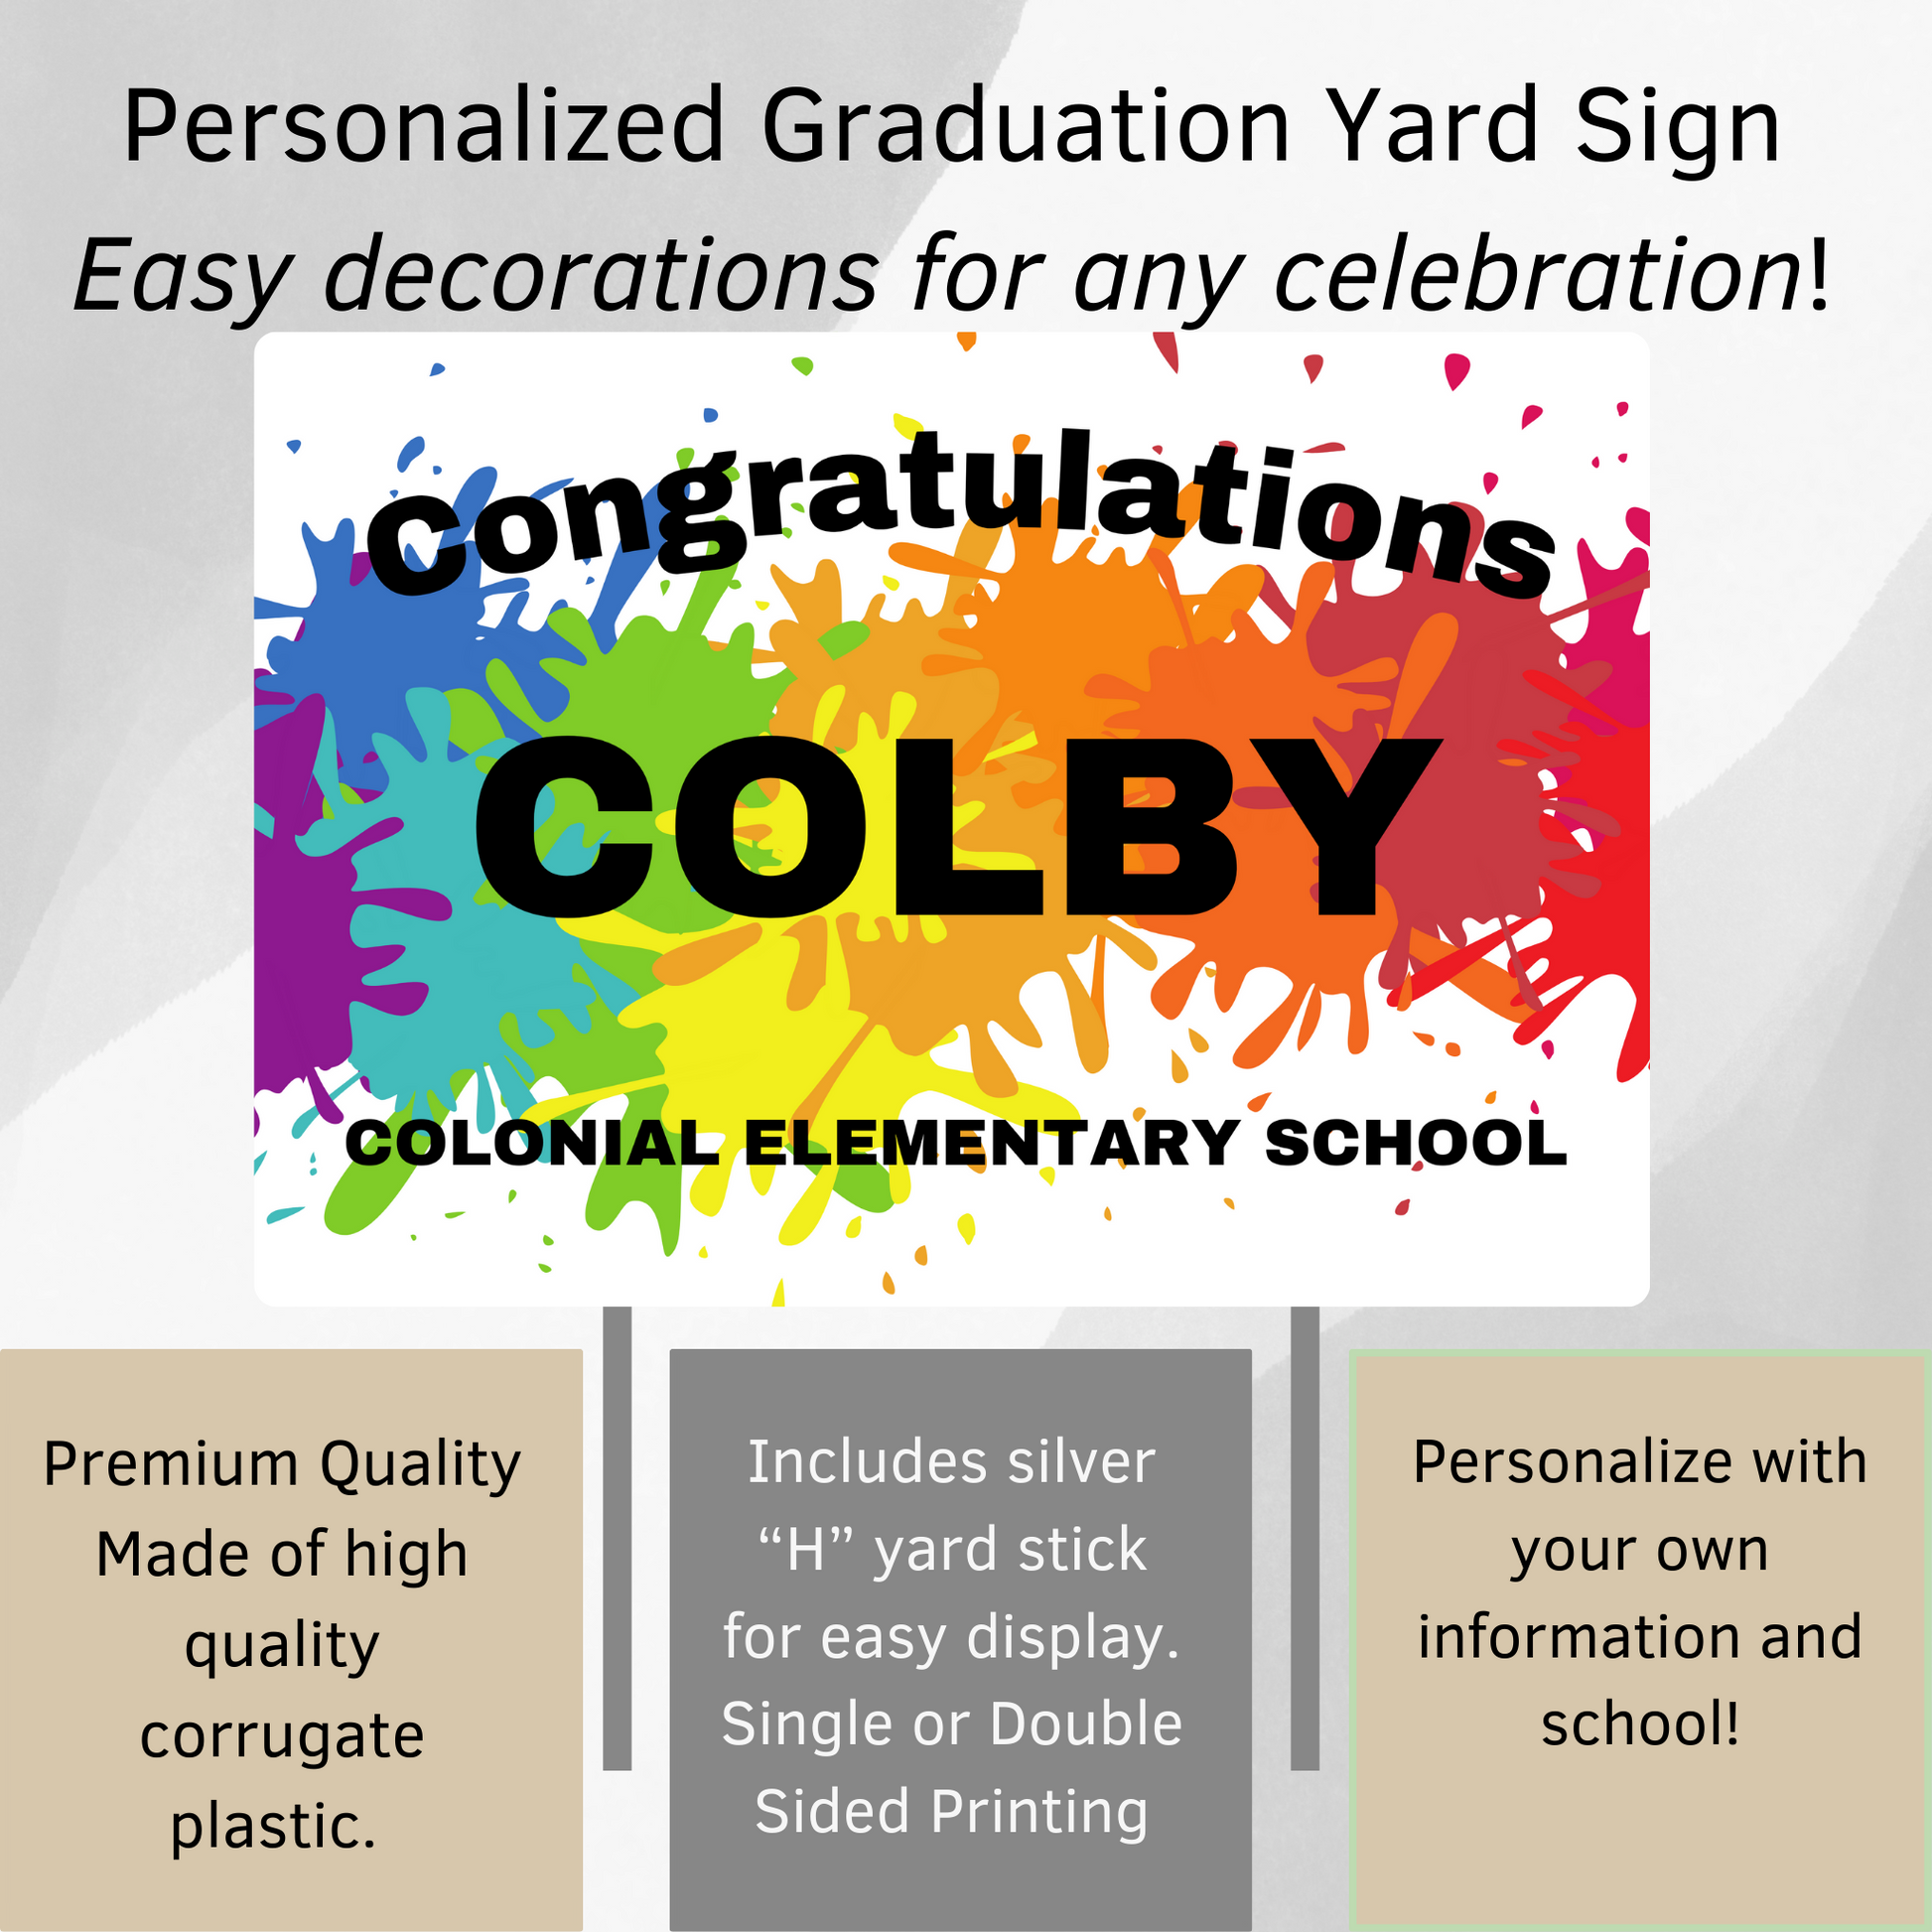 Personalized Graduation Yard Sign. Easy decoration for any celebration. Made of high quality corrugate plastic and easy to personalize. Includes metal "H" yard stick.